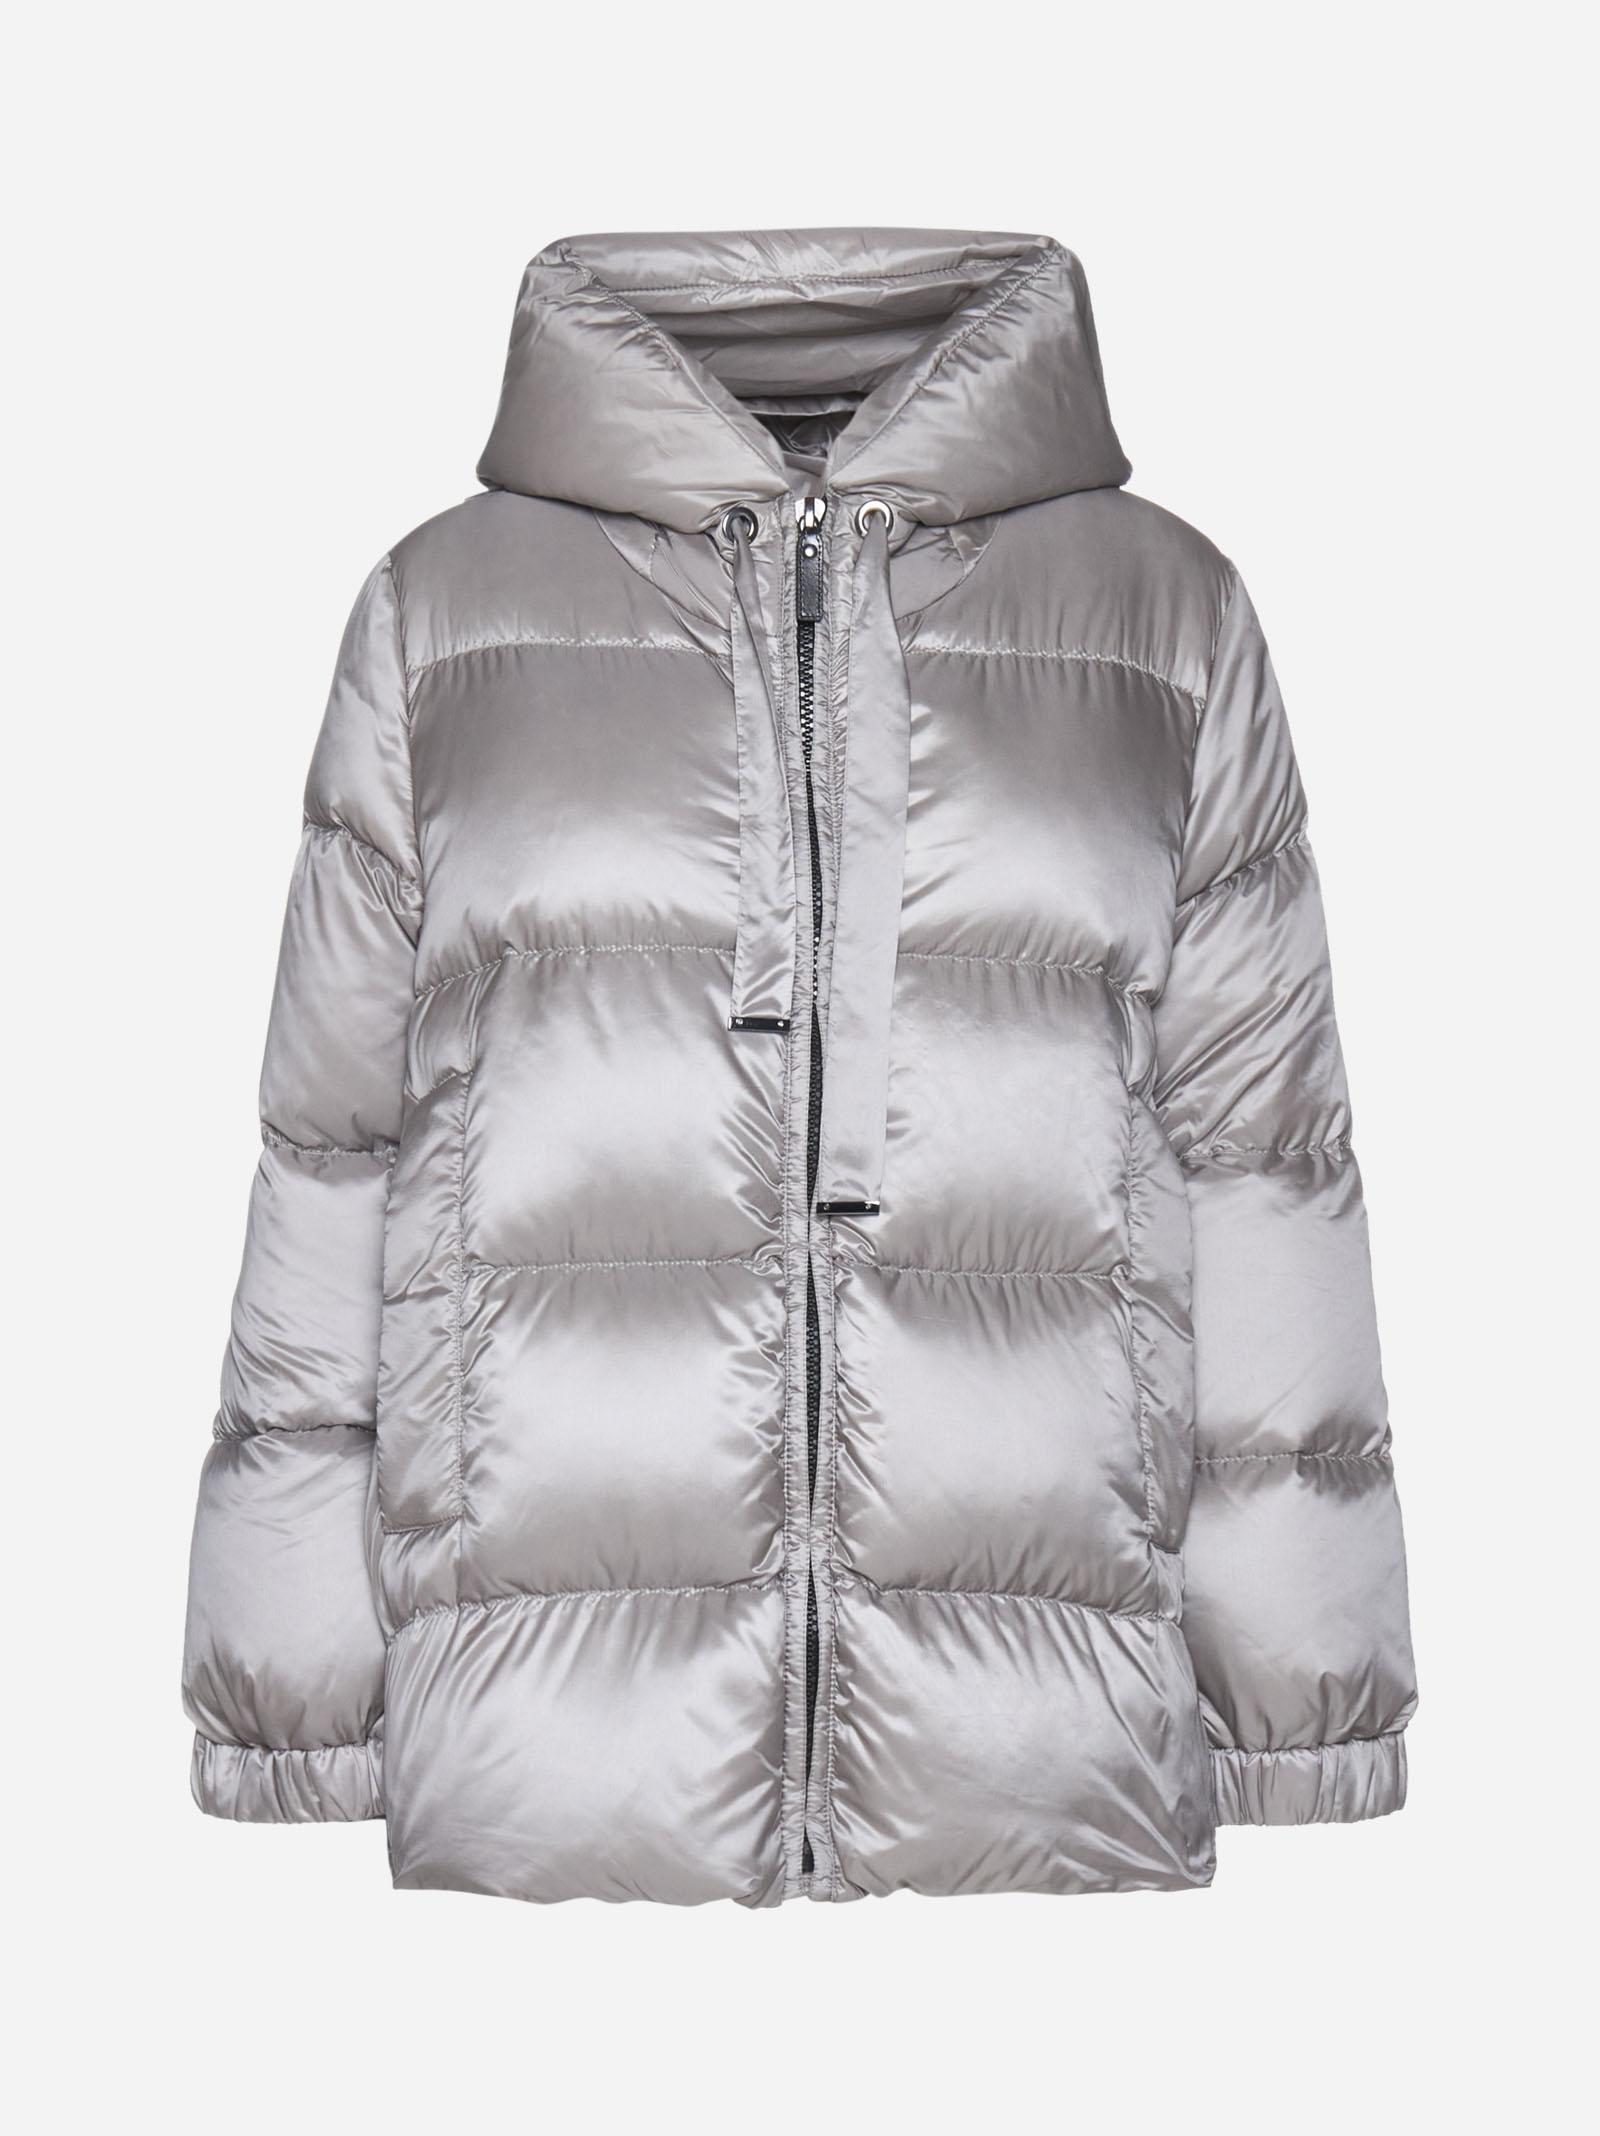 Max Mara The Cube Seia Quilted Nylon Down Jacket in Gray | Lyst